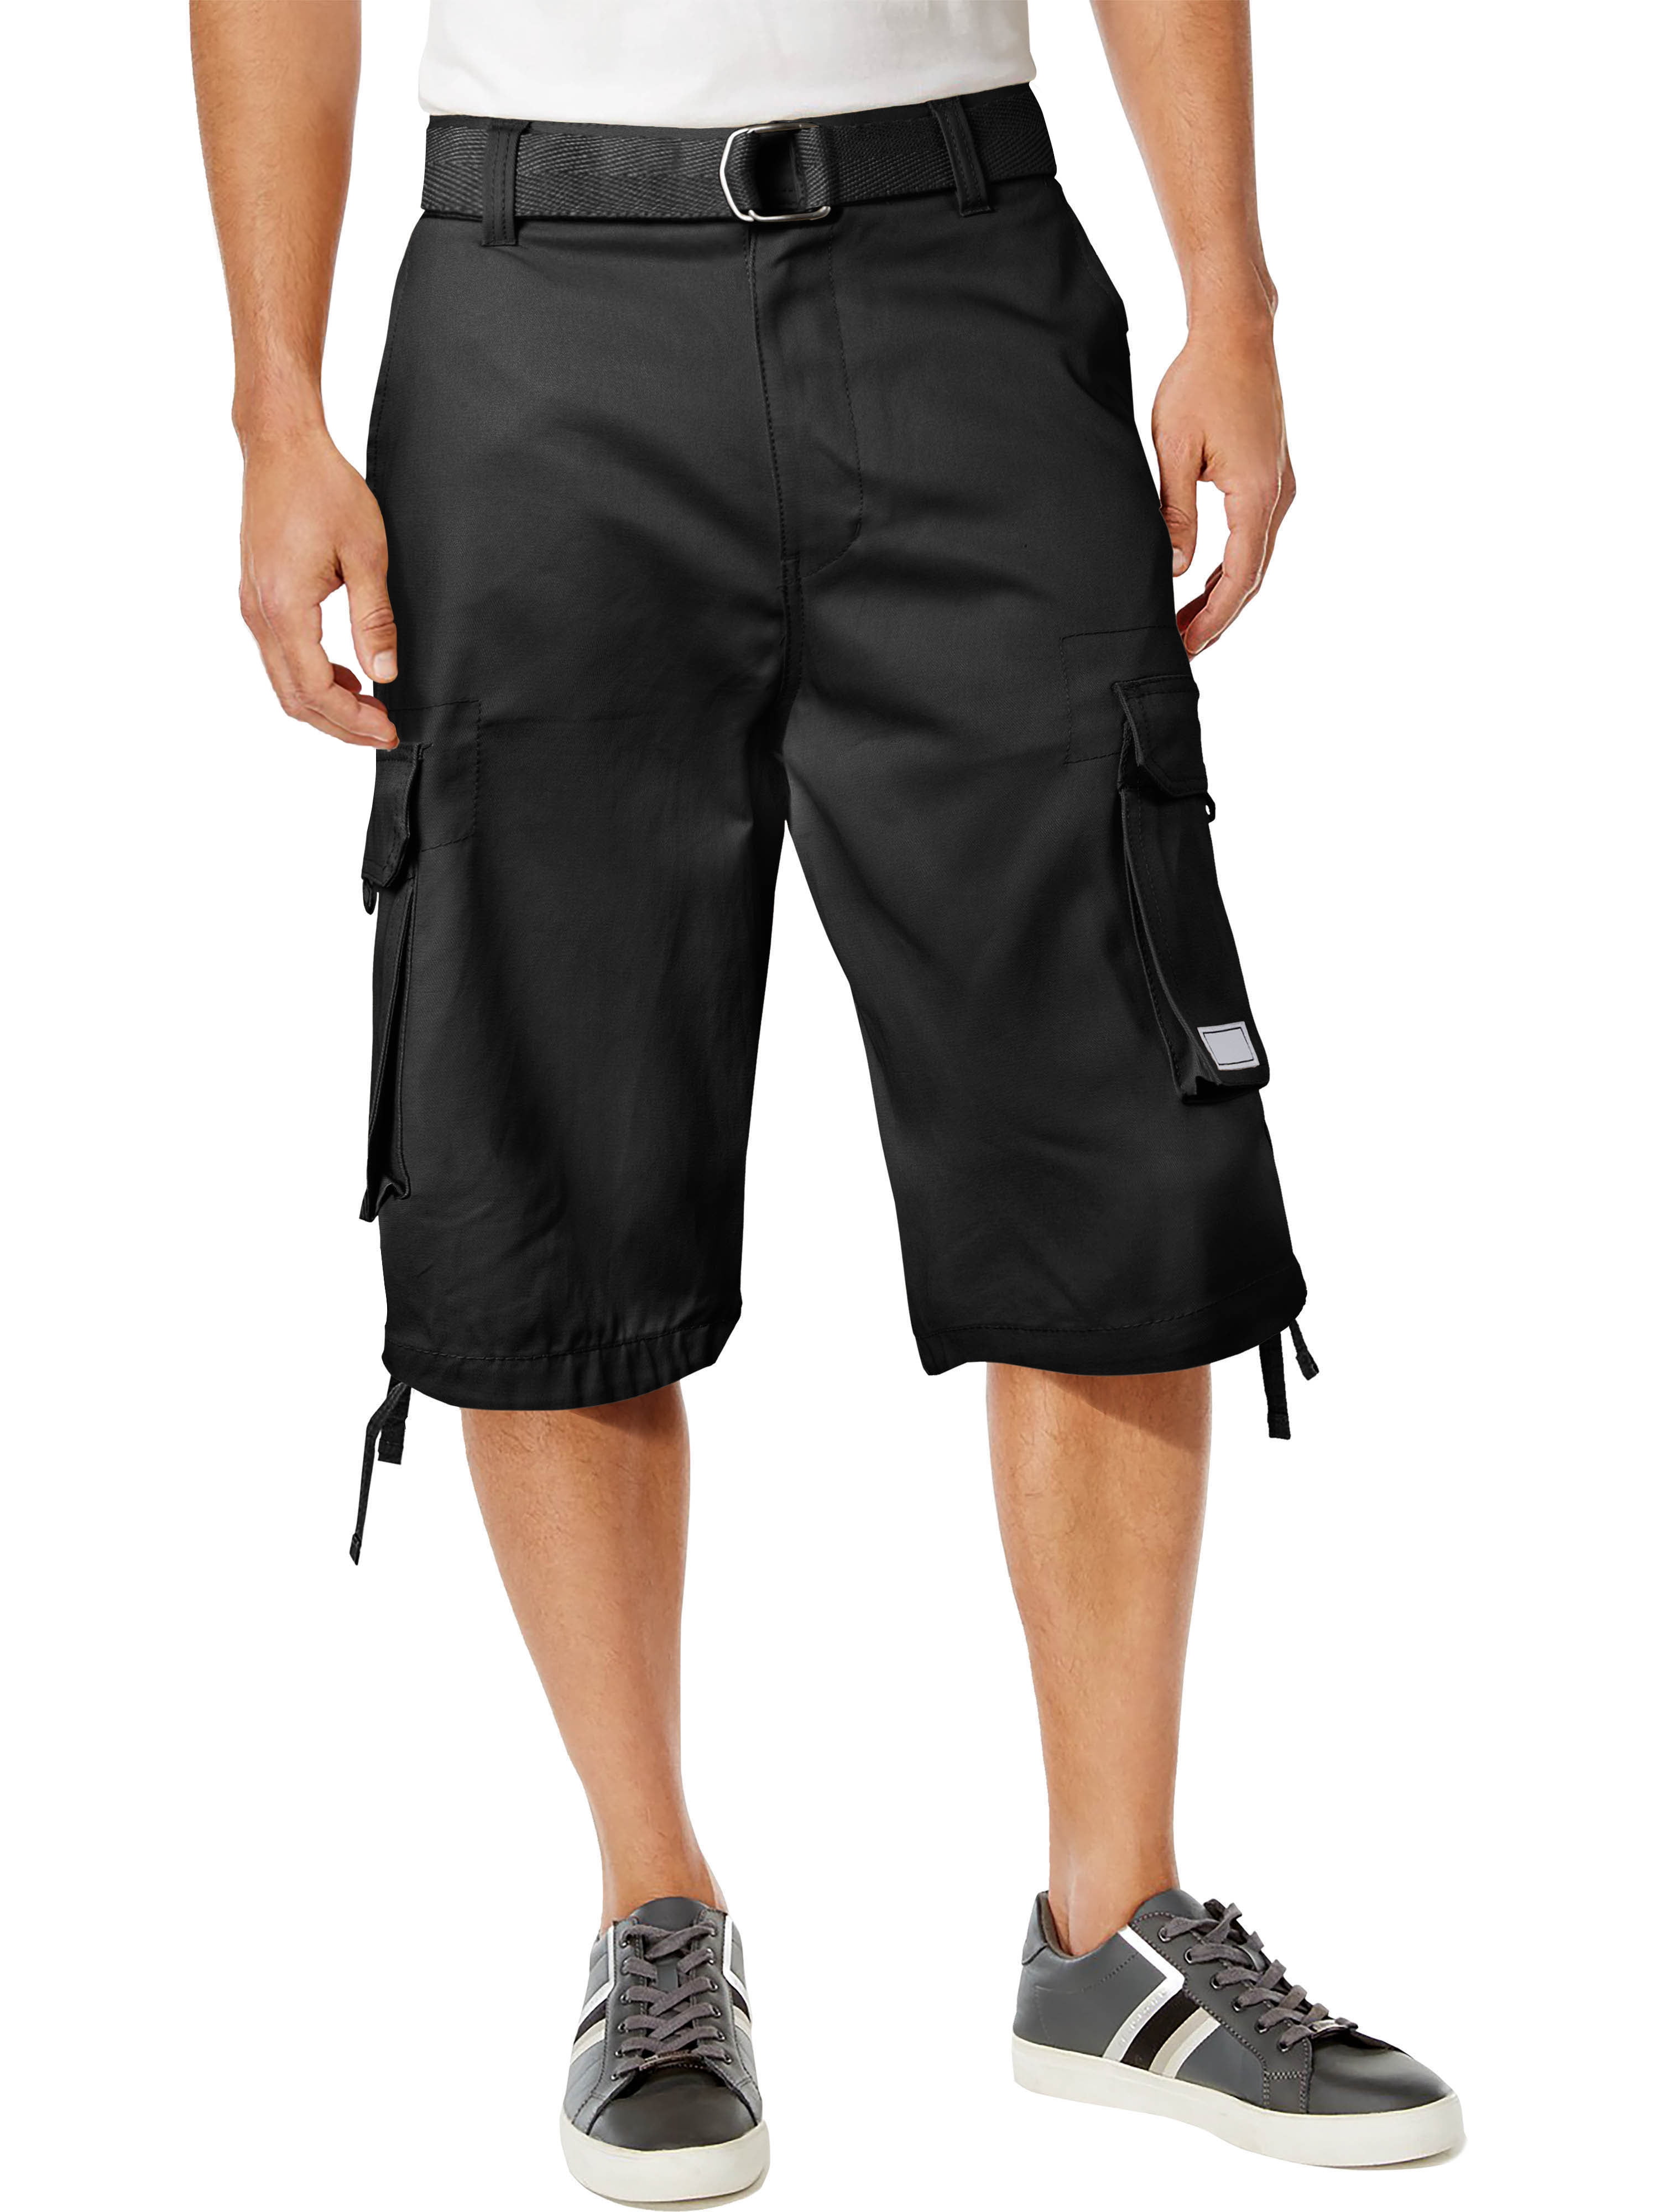 Pro Club Mens Cotton Twill Cargo Shorts with Belt Regular and Big /& Tall Sizes